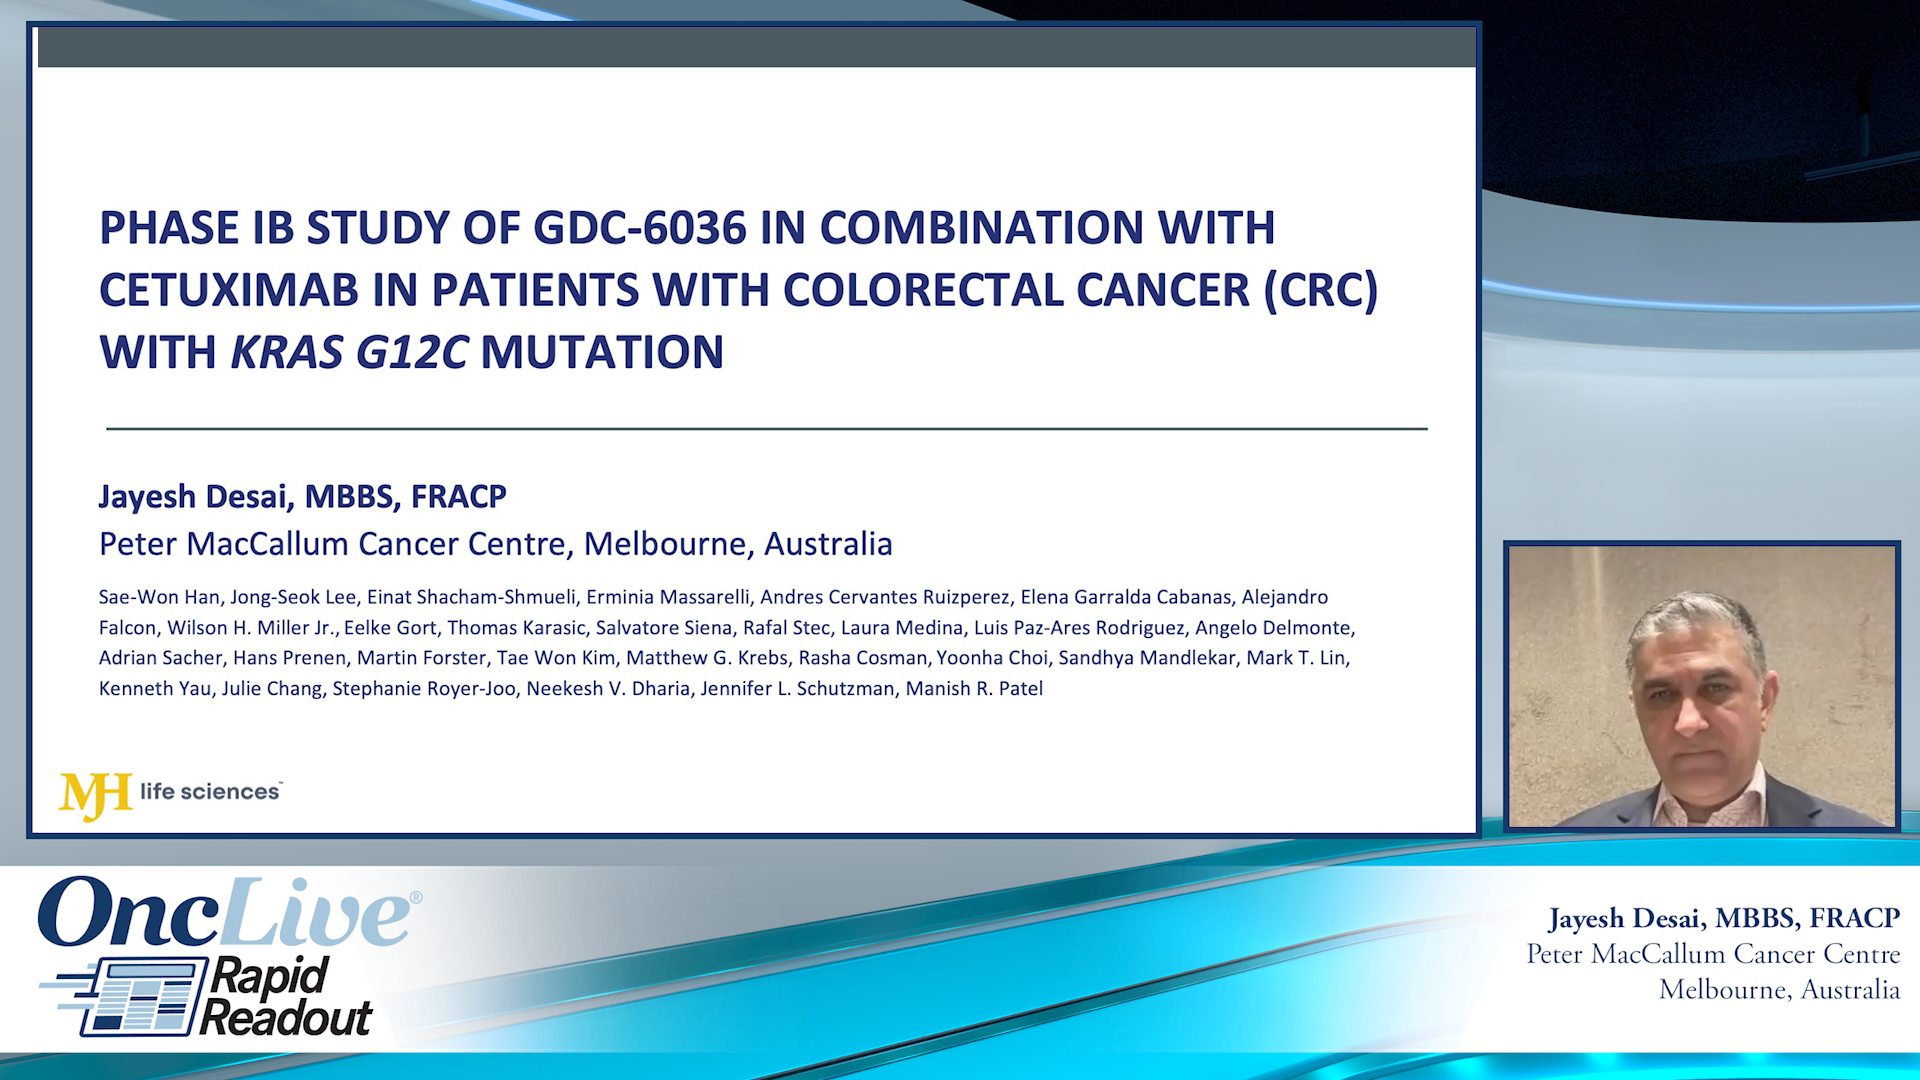 Phase IB Study of GDC-6036 in Combination with Cetuximab in Patients With Colorectal Cancer (CRC) With KRAS G12C Mutation